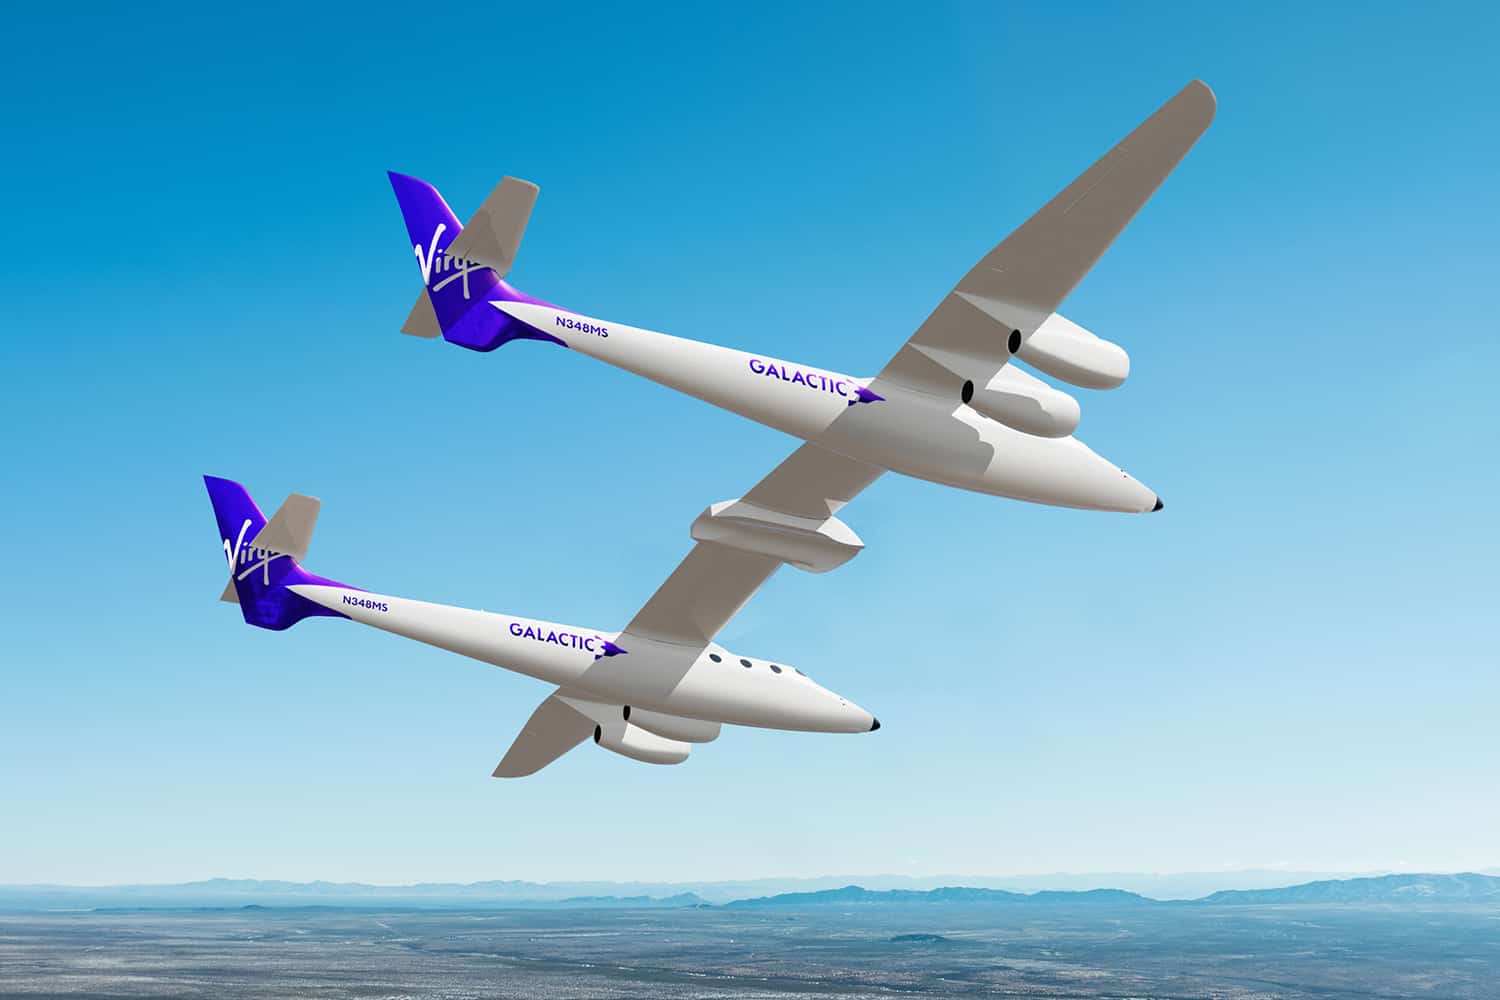 Aurora to build new motherships for Virgin Galactic spaceflights.